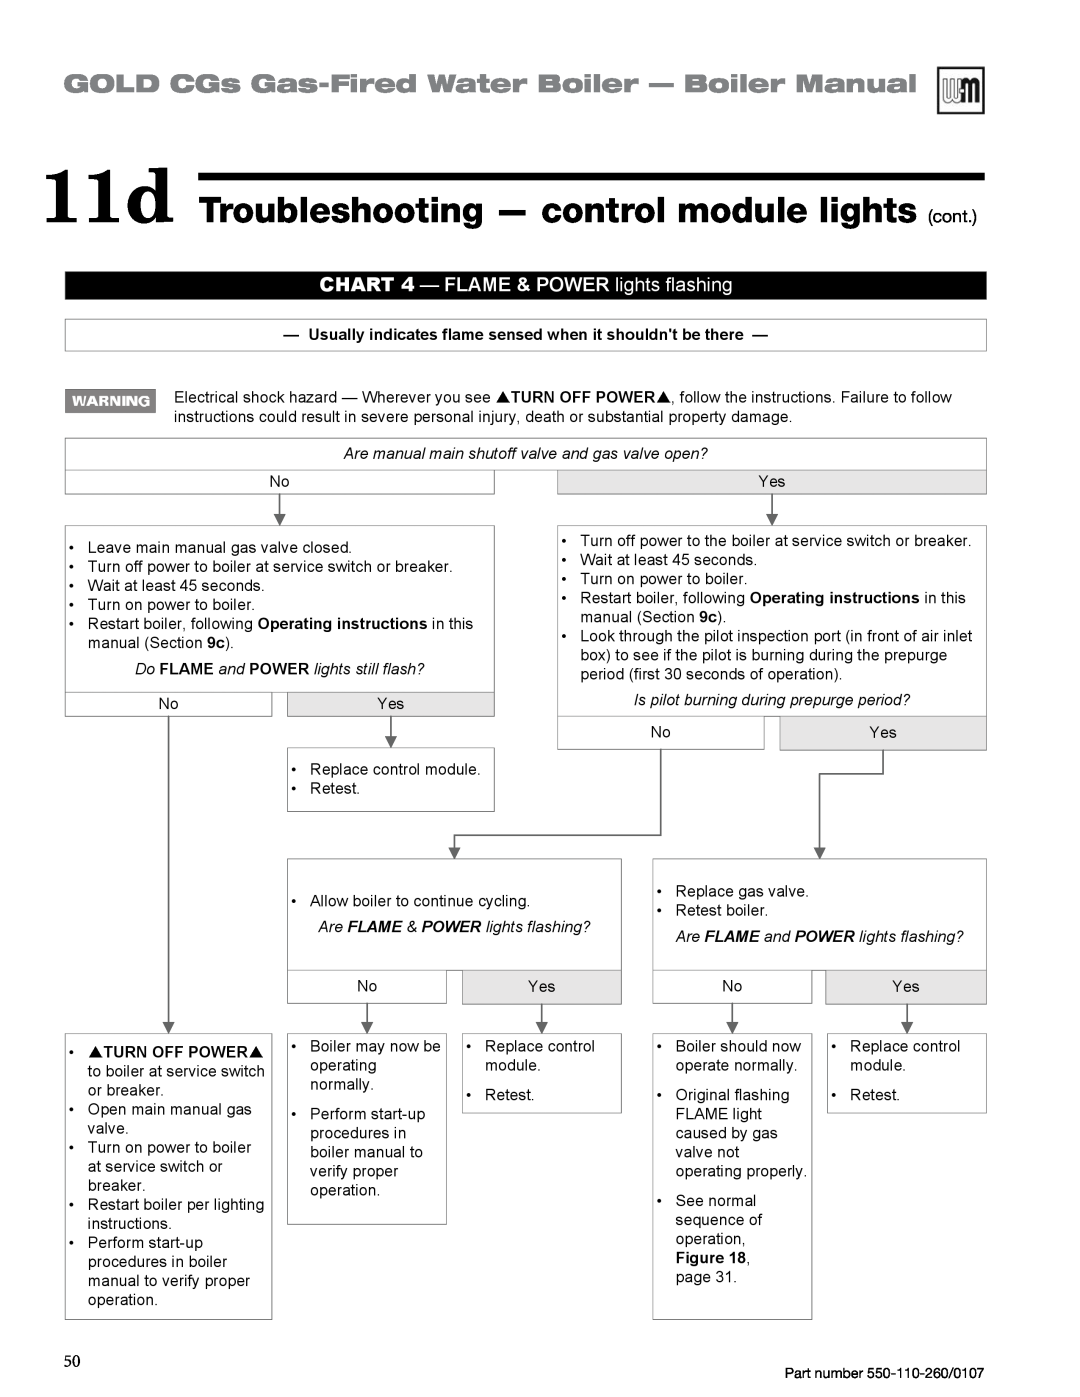 Weil-McLain 550-110-260/0107 11d Troubleshooting — control module lights cont, Do FLAME and POWER lights still flash? 